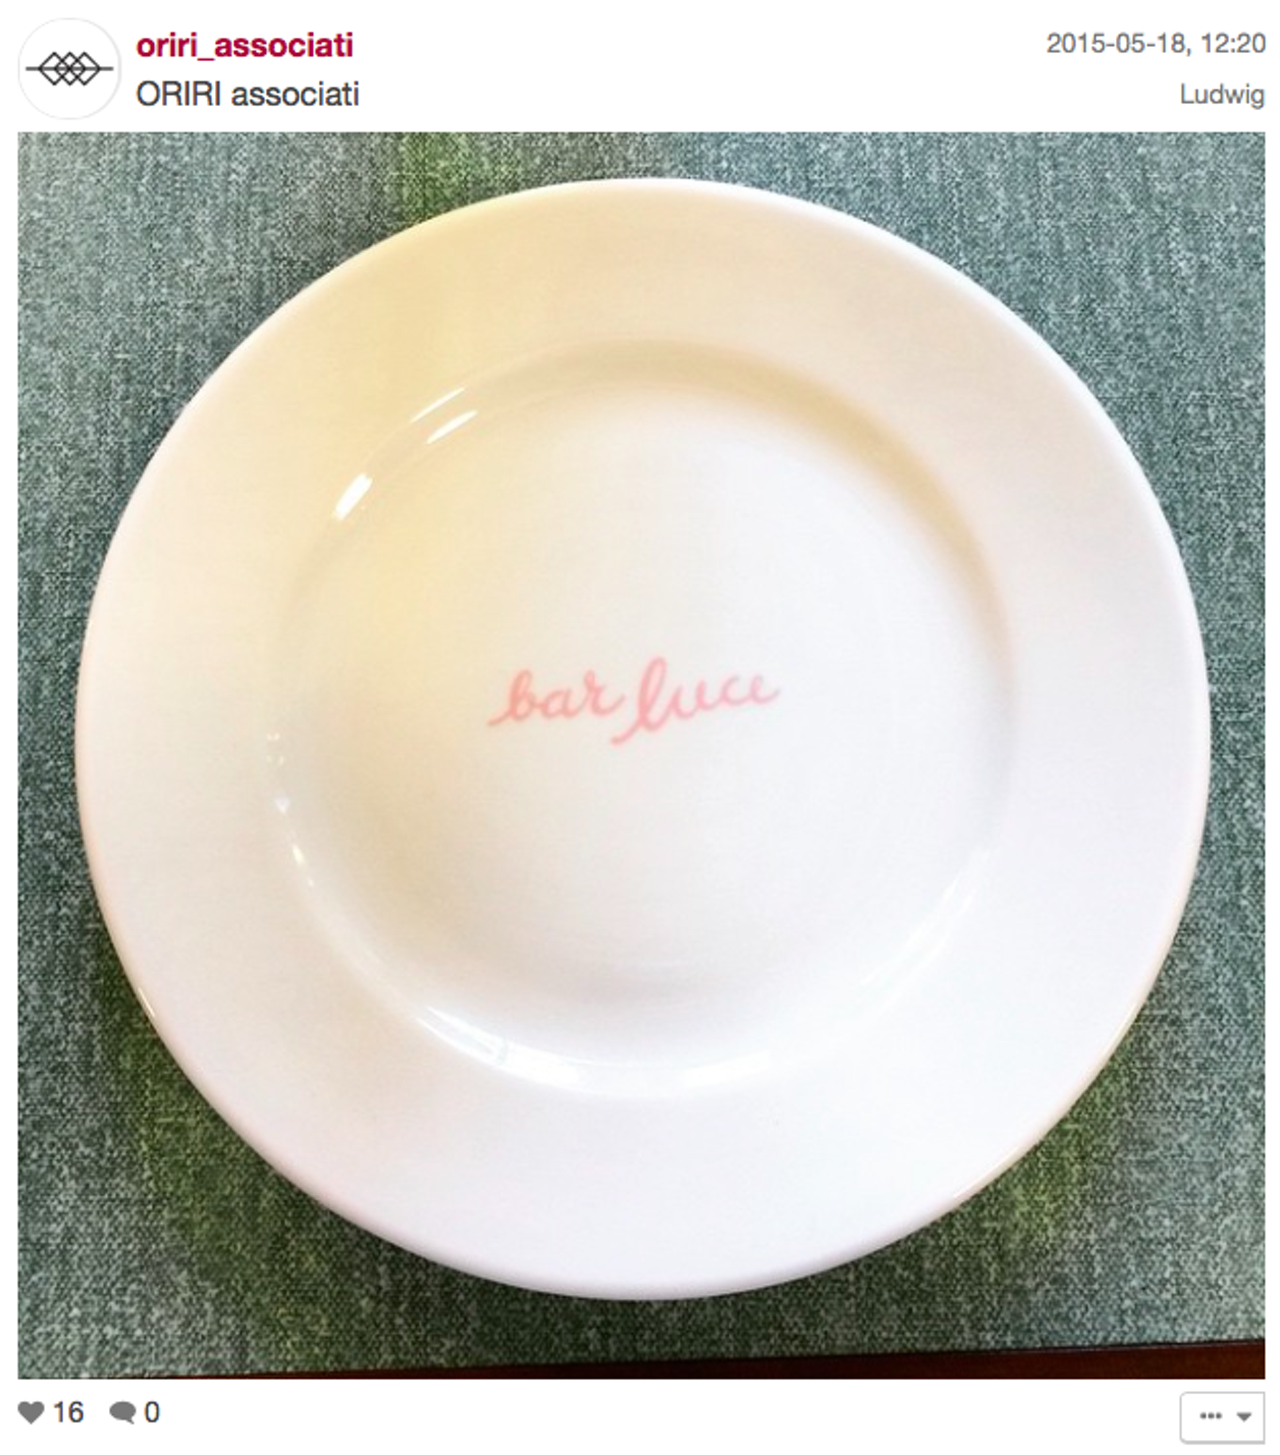 ... the plates are gorgeous (we're willing to bet they lose a fair few bits of china to pilfering fans) ...